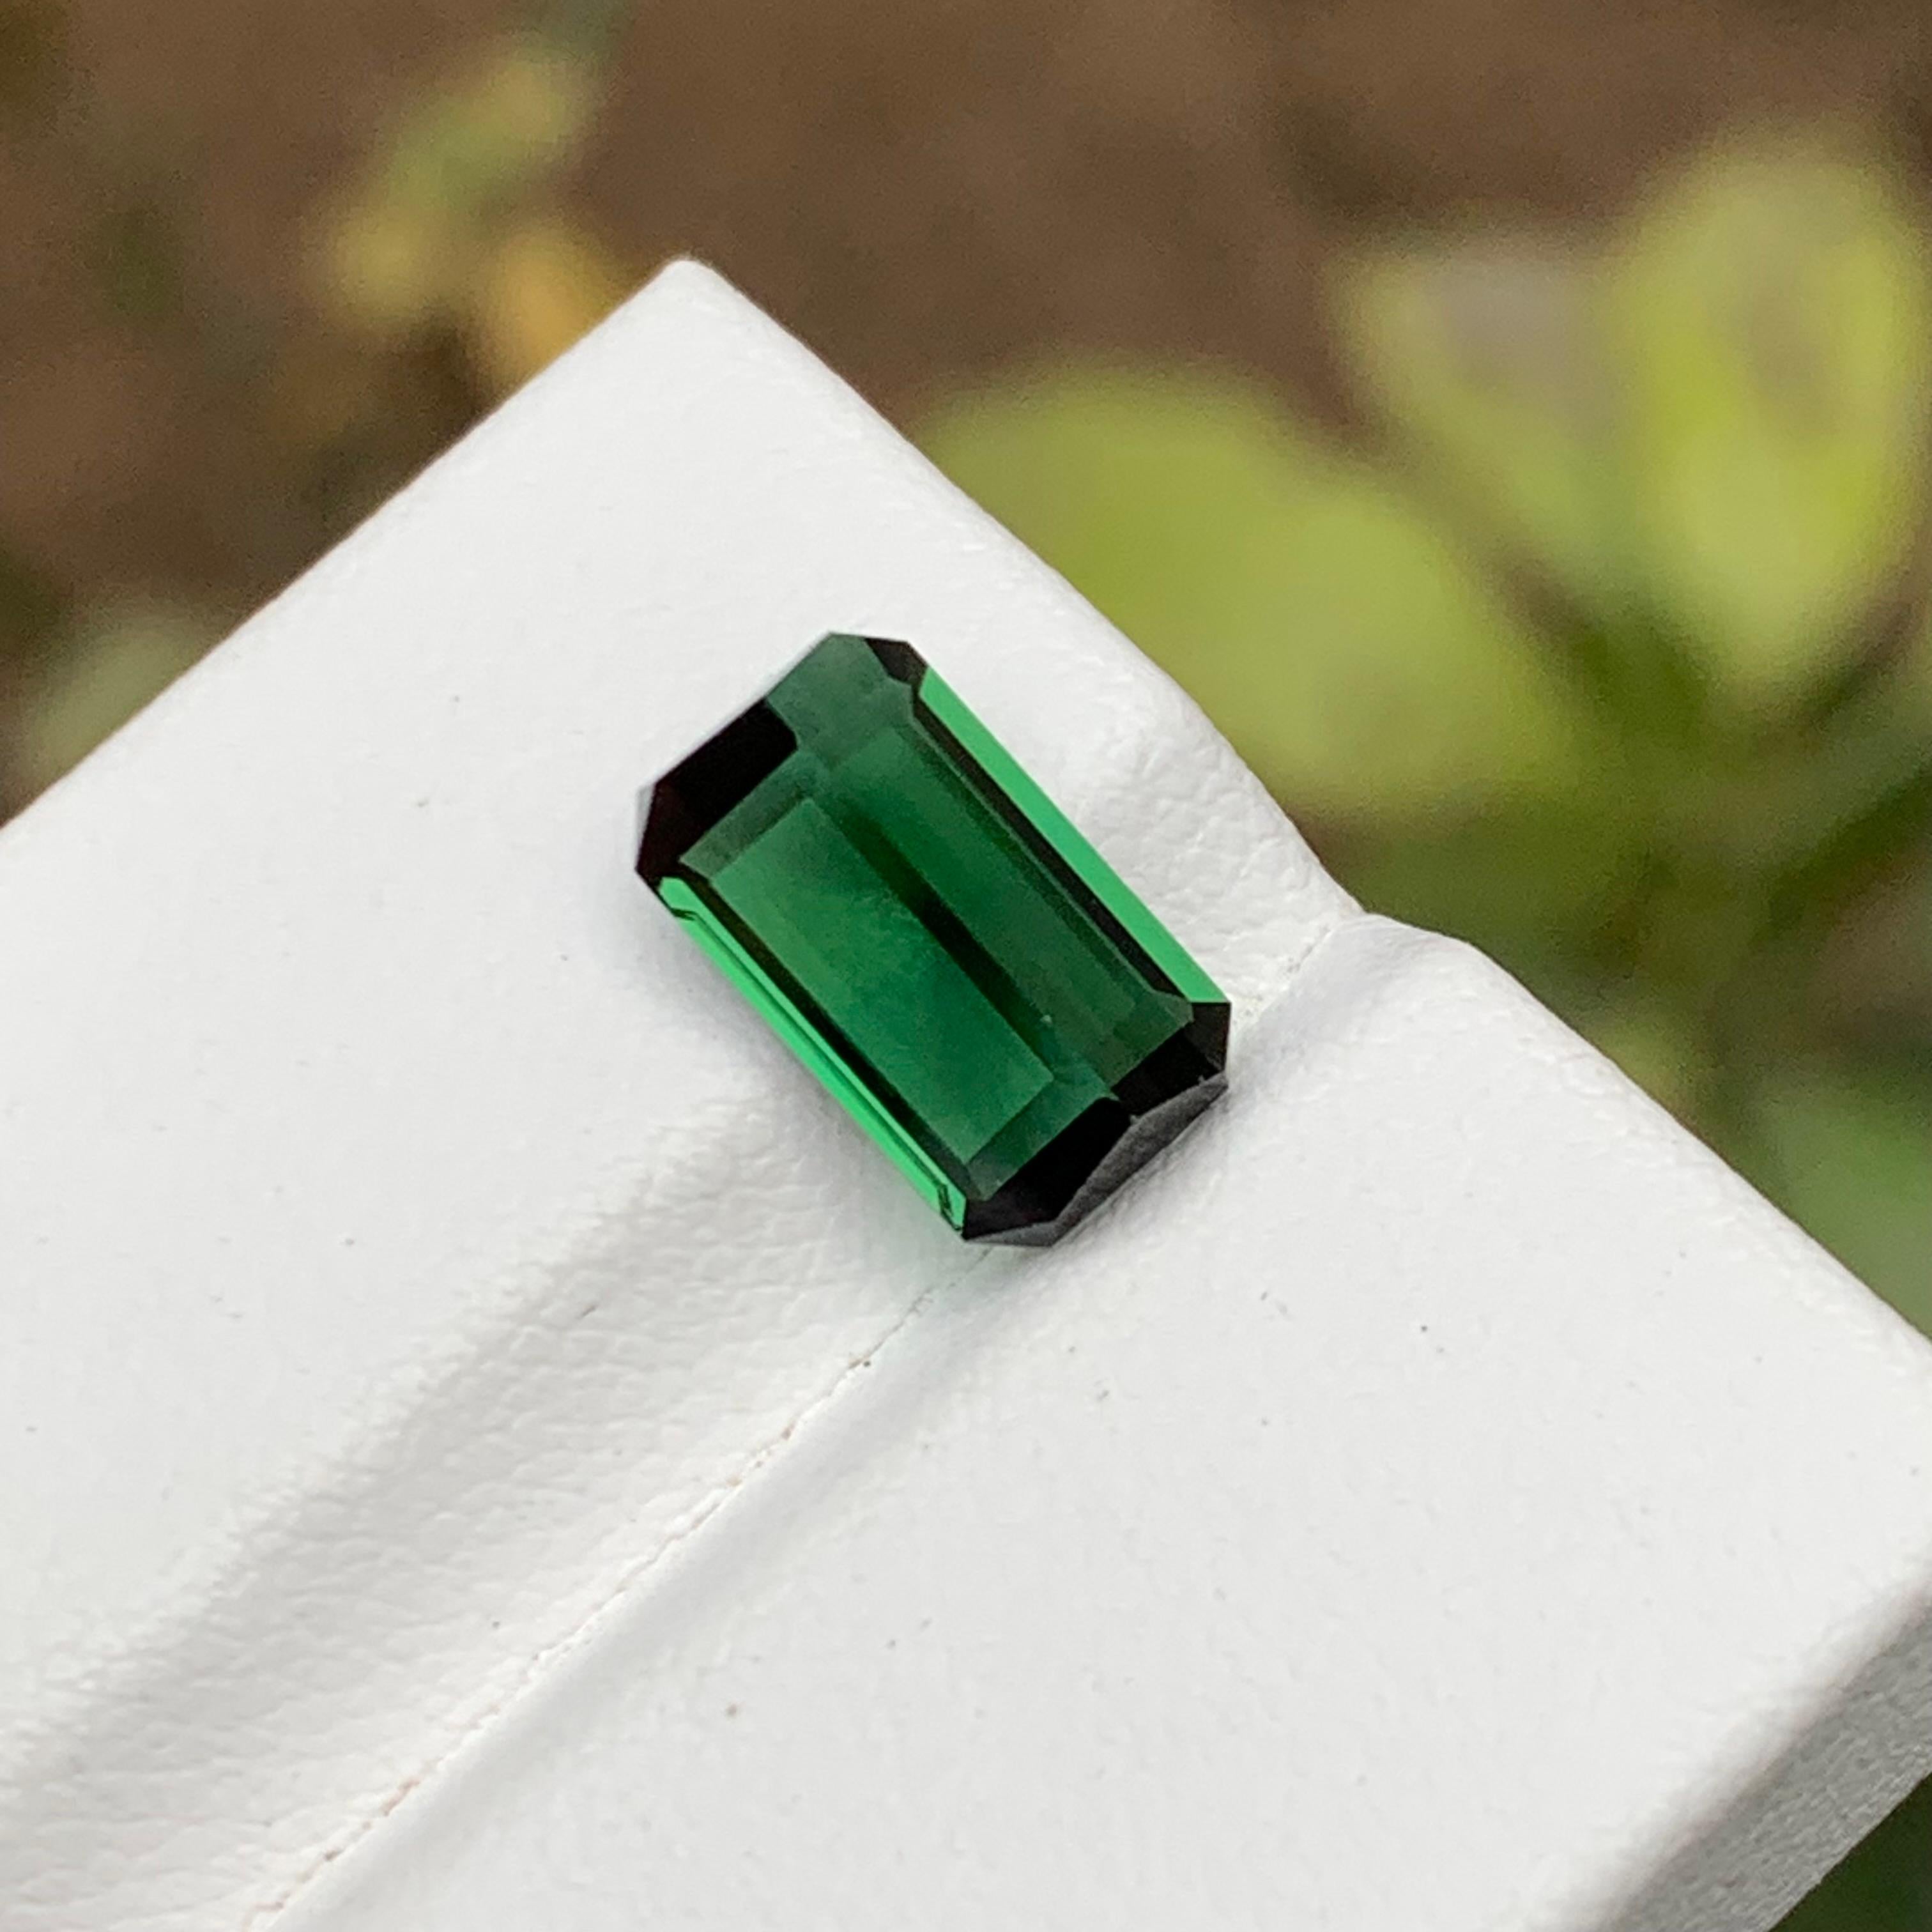 Contemporary Rare Deep Green Natural Tourmaline Gemstone 2.95 Ct Emerald Cut for Ring/Pendant For Sale